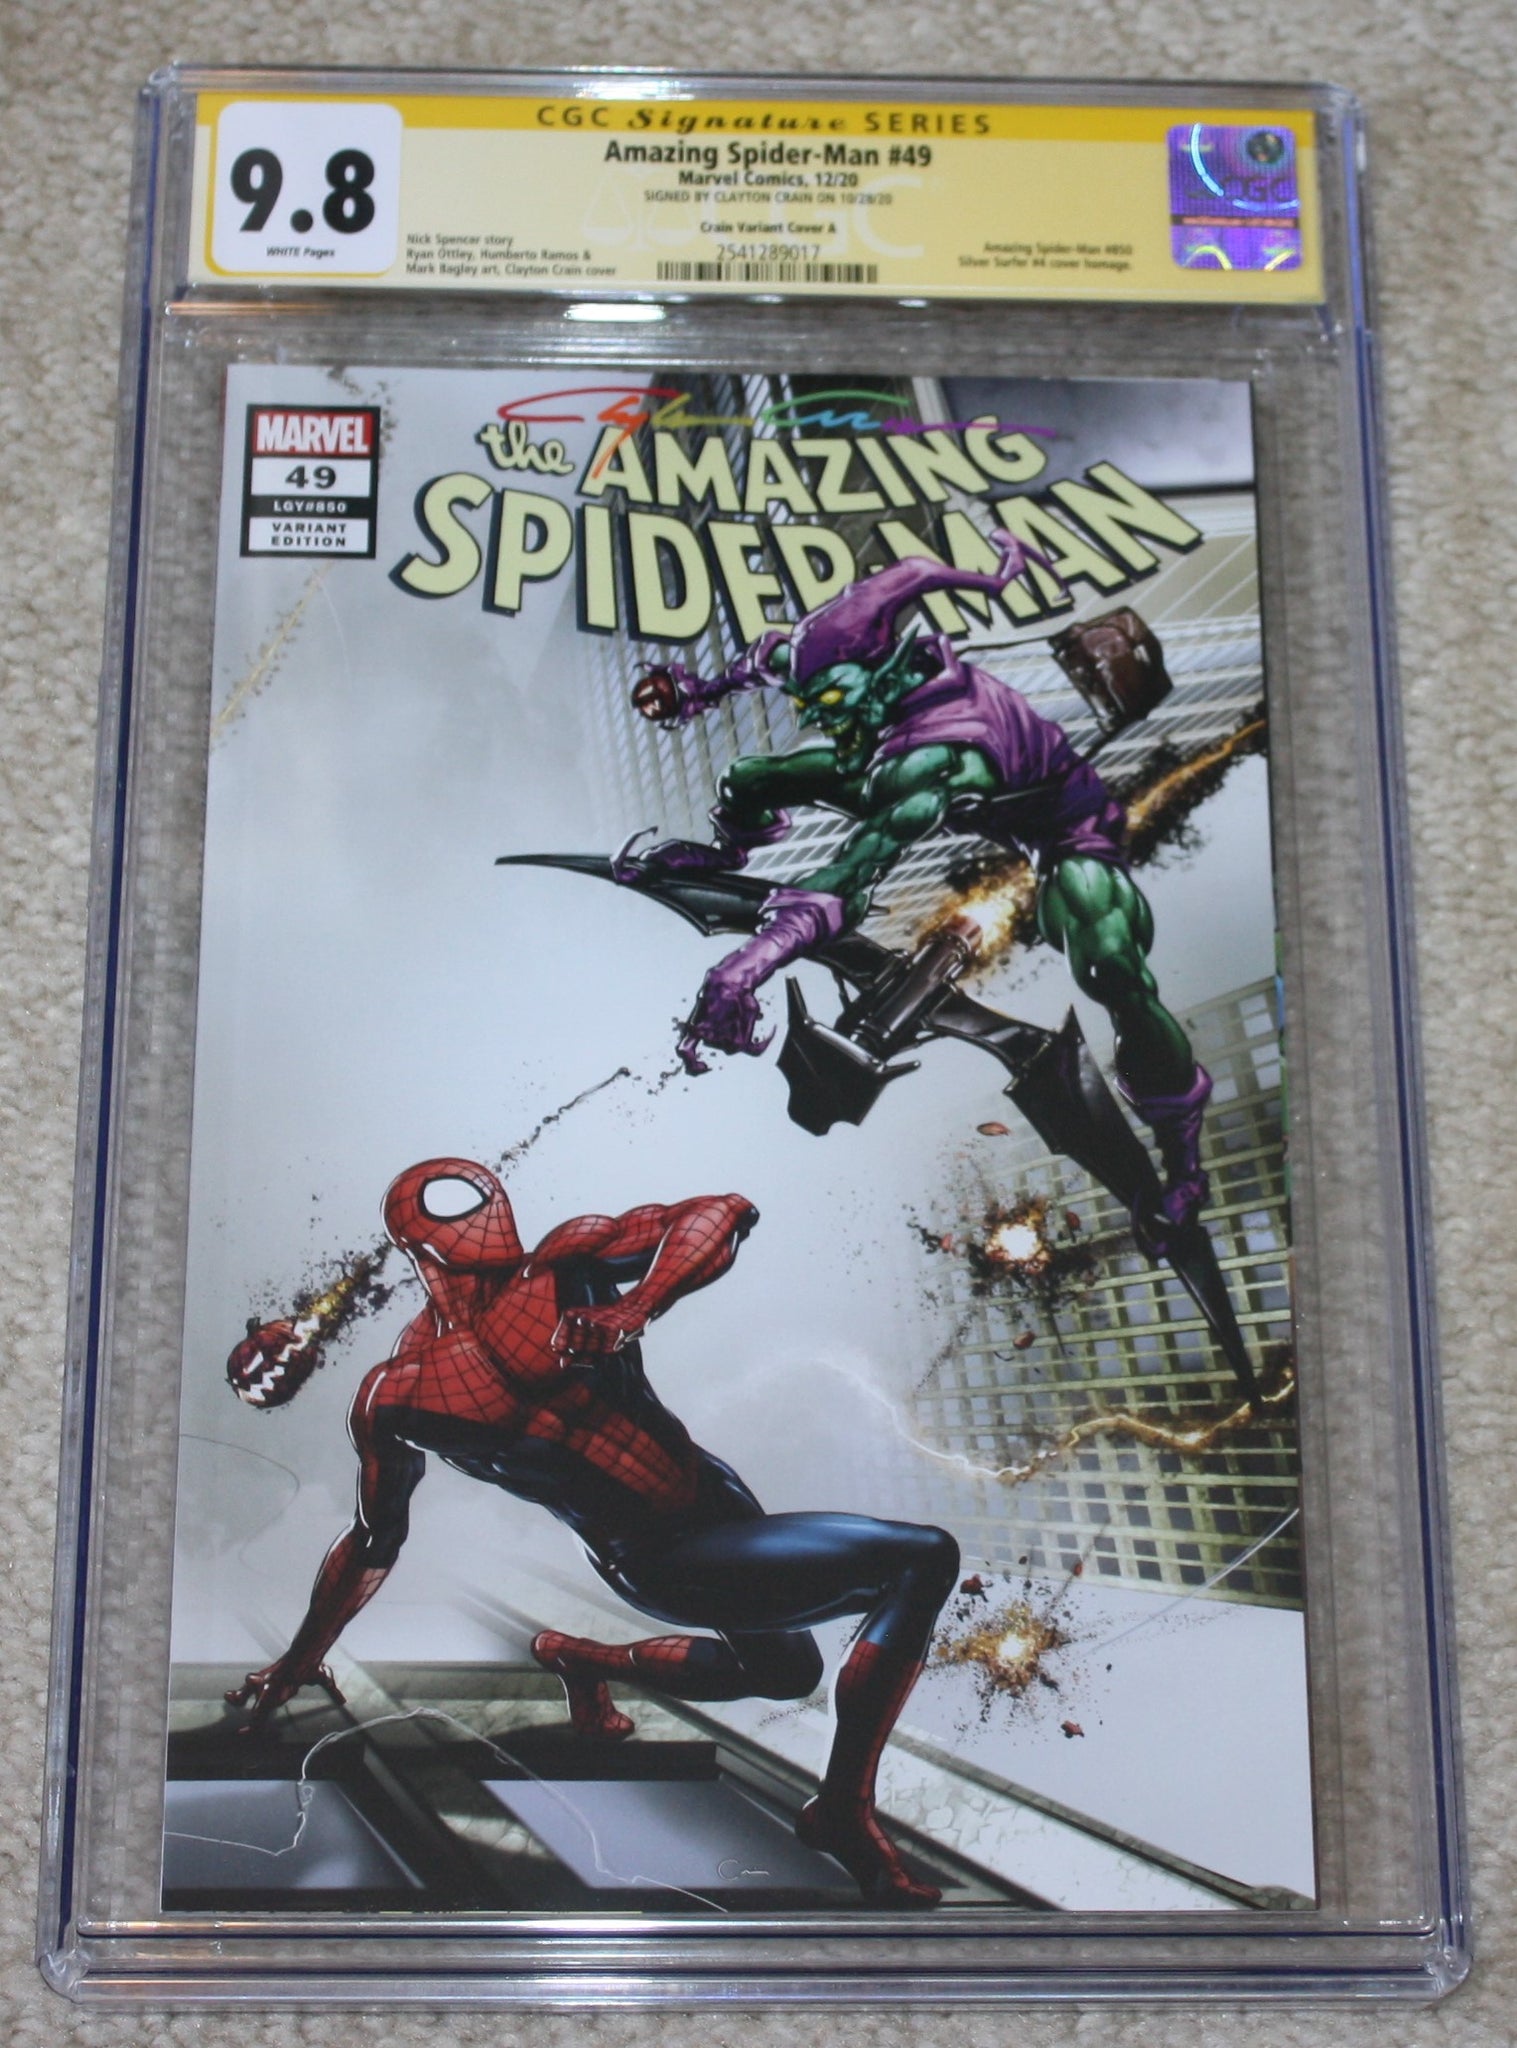 AMAZING SPIDER-MAN #850 (#49) CGC SS 9.8 CLAYTON CRAIN INFINITY SIGNED TRADE DRESS VARIANT-A